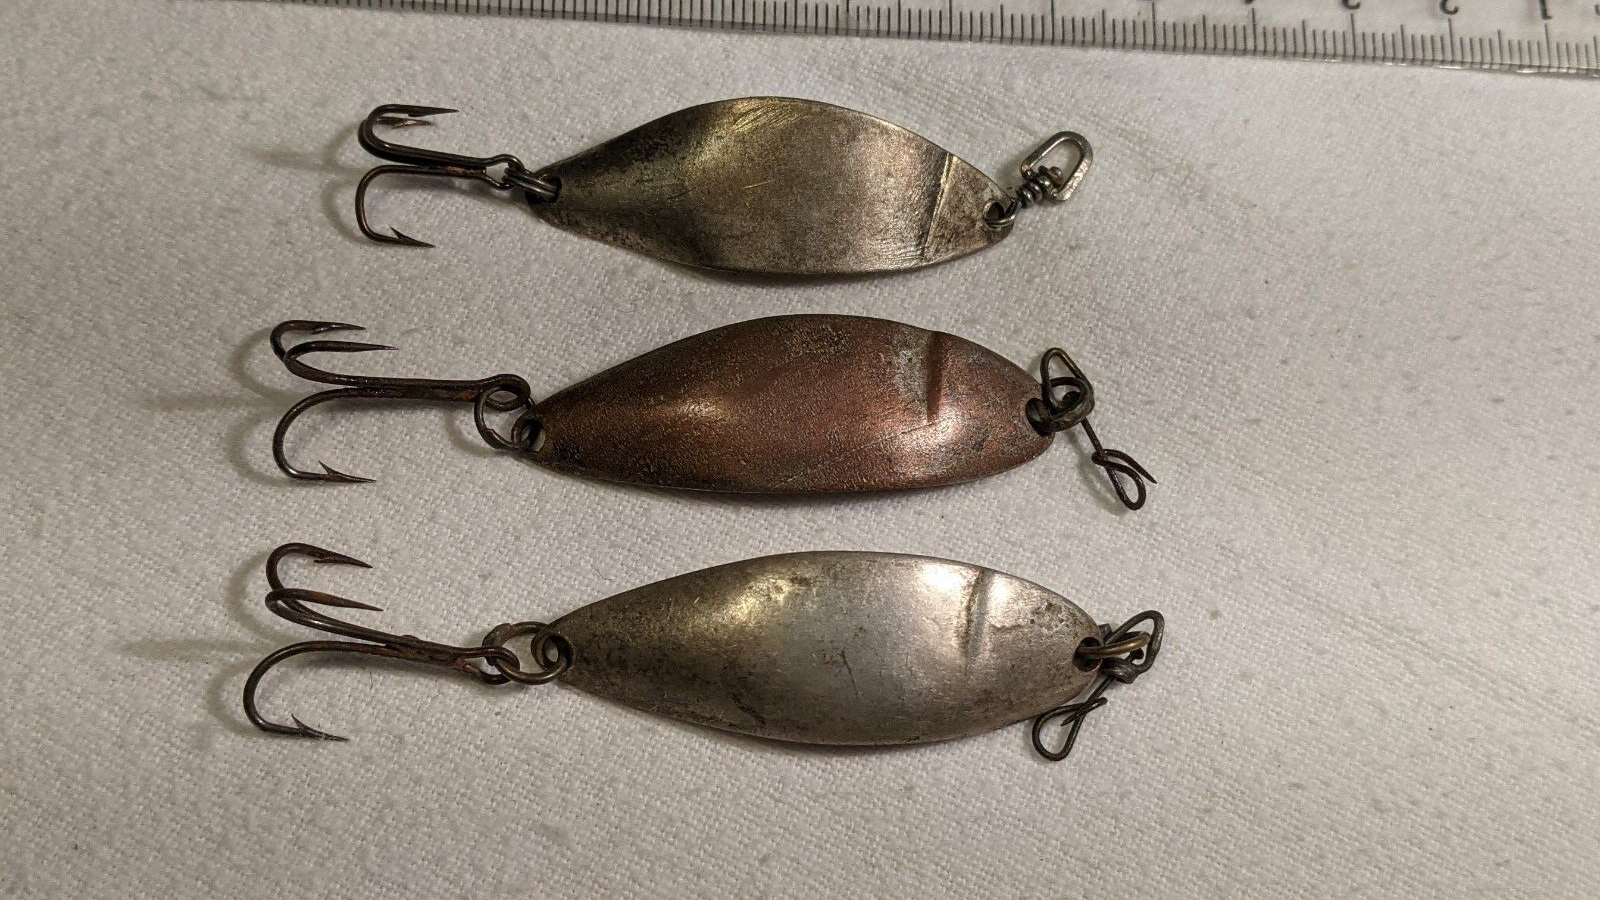 Vintage Kingfisher(?) fishing lure lot of 3 Unbranded